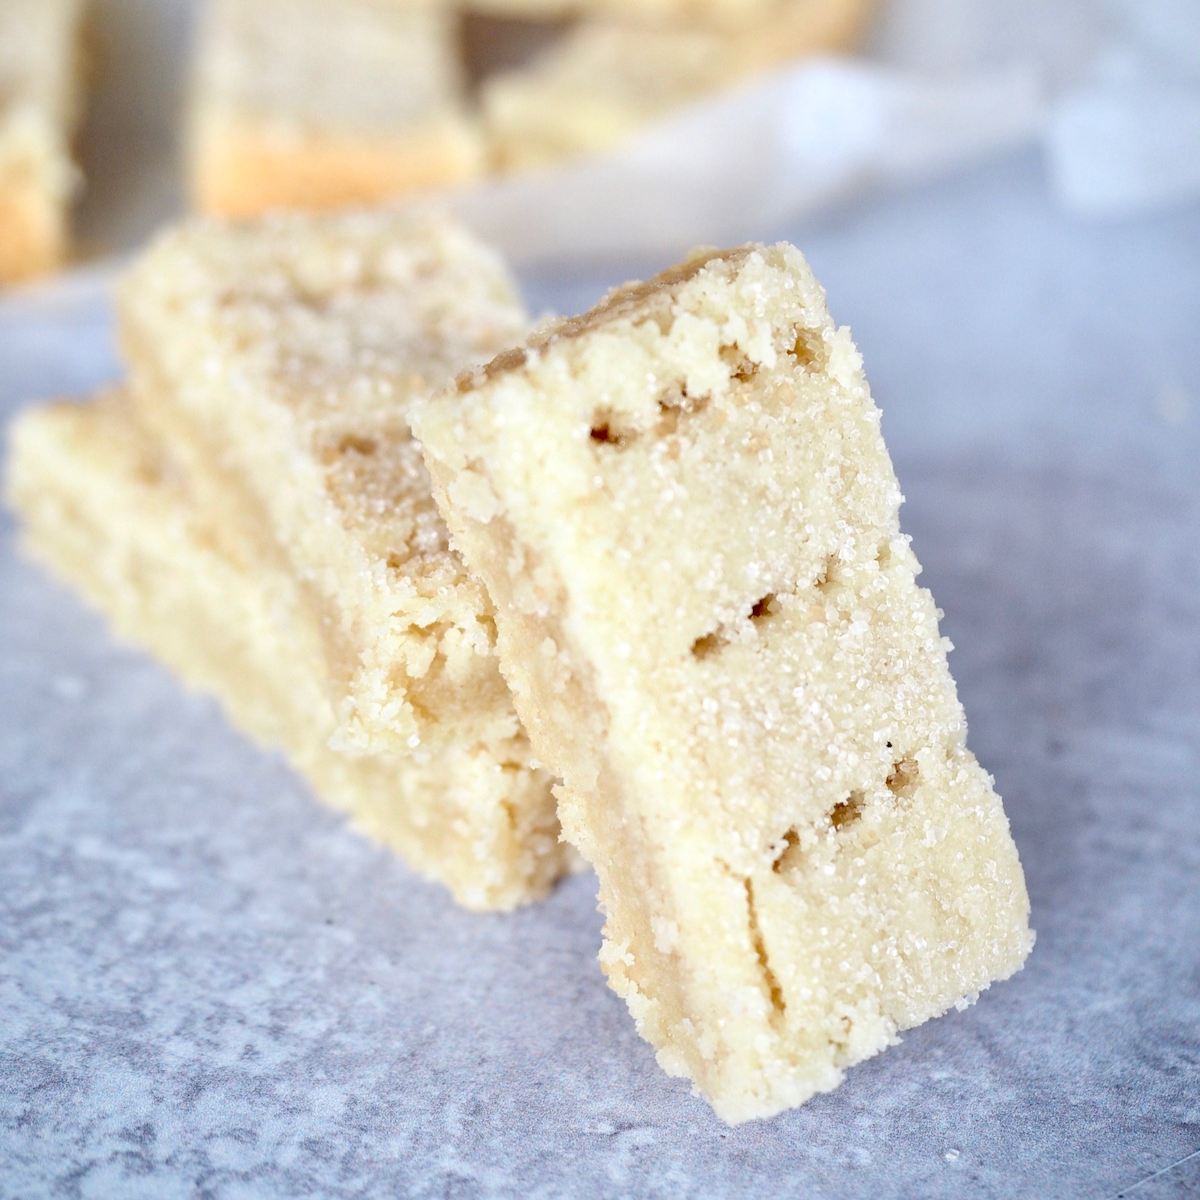 Scotch shortbread fingers, buttery, crumbly and light.